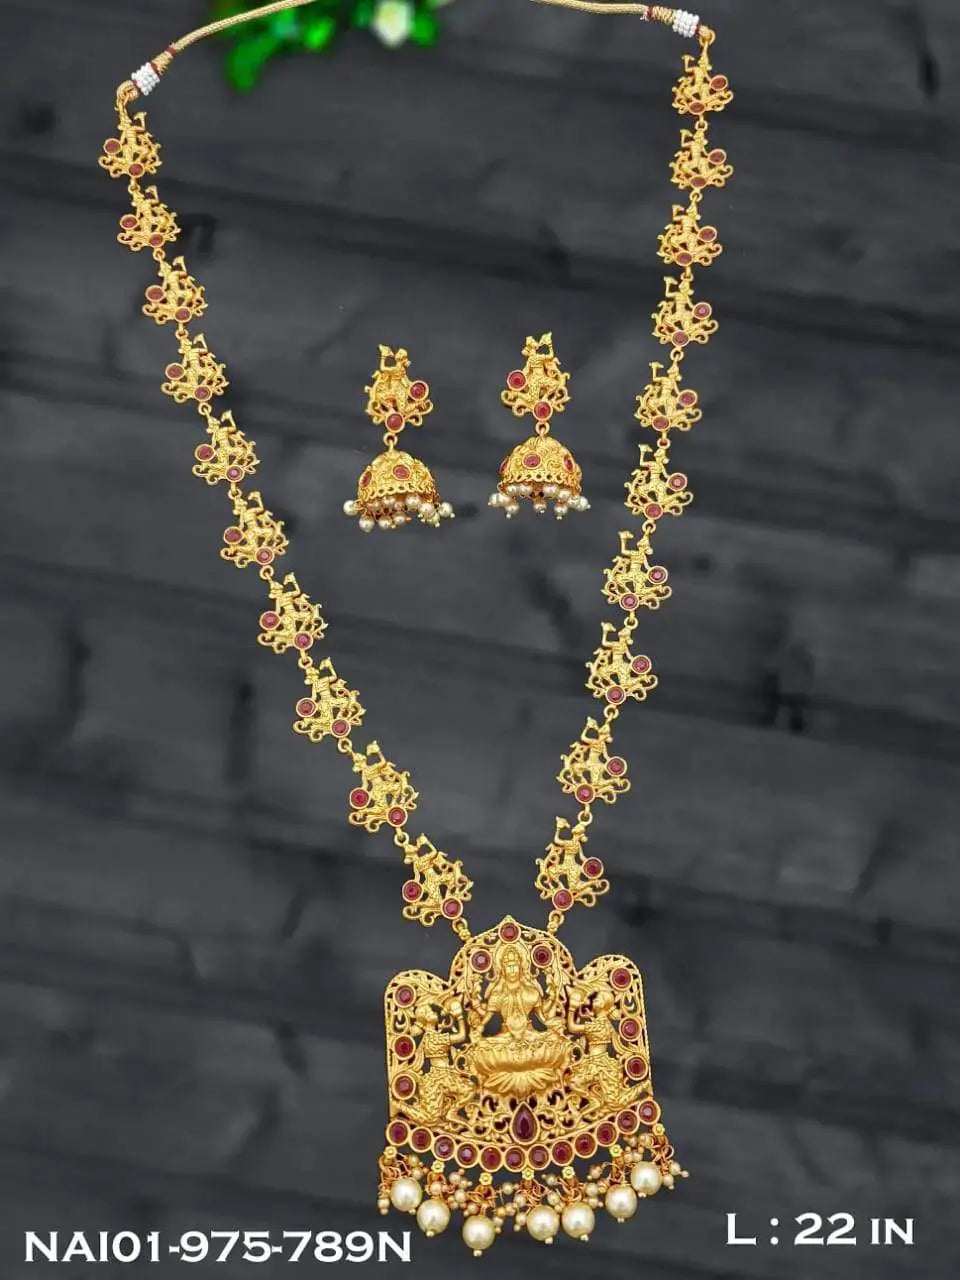 Gold Plated Best Seller Lakshmi Long Necklace Set FREE Express Delivery NAI01-975-789N